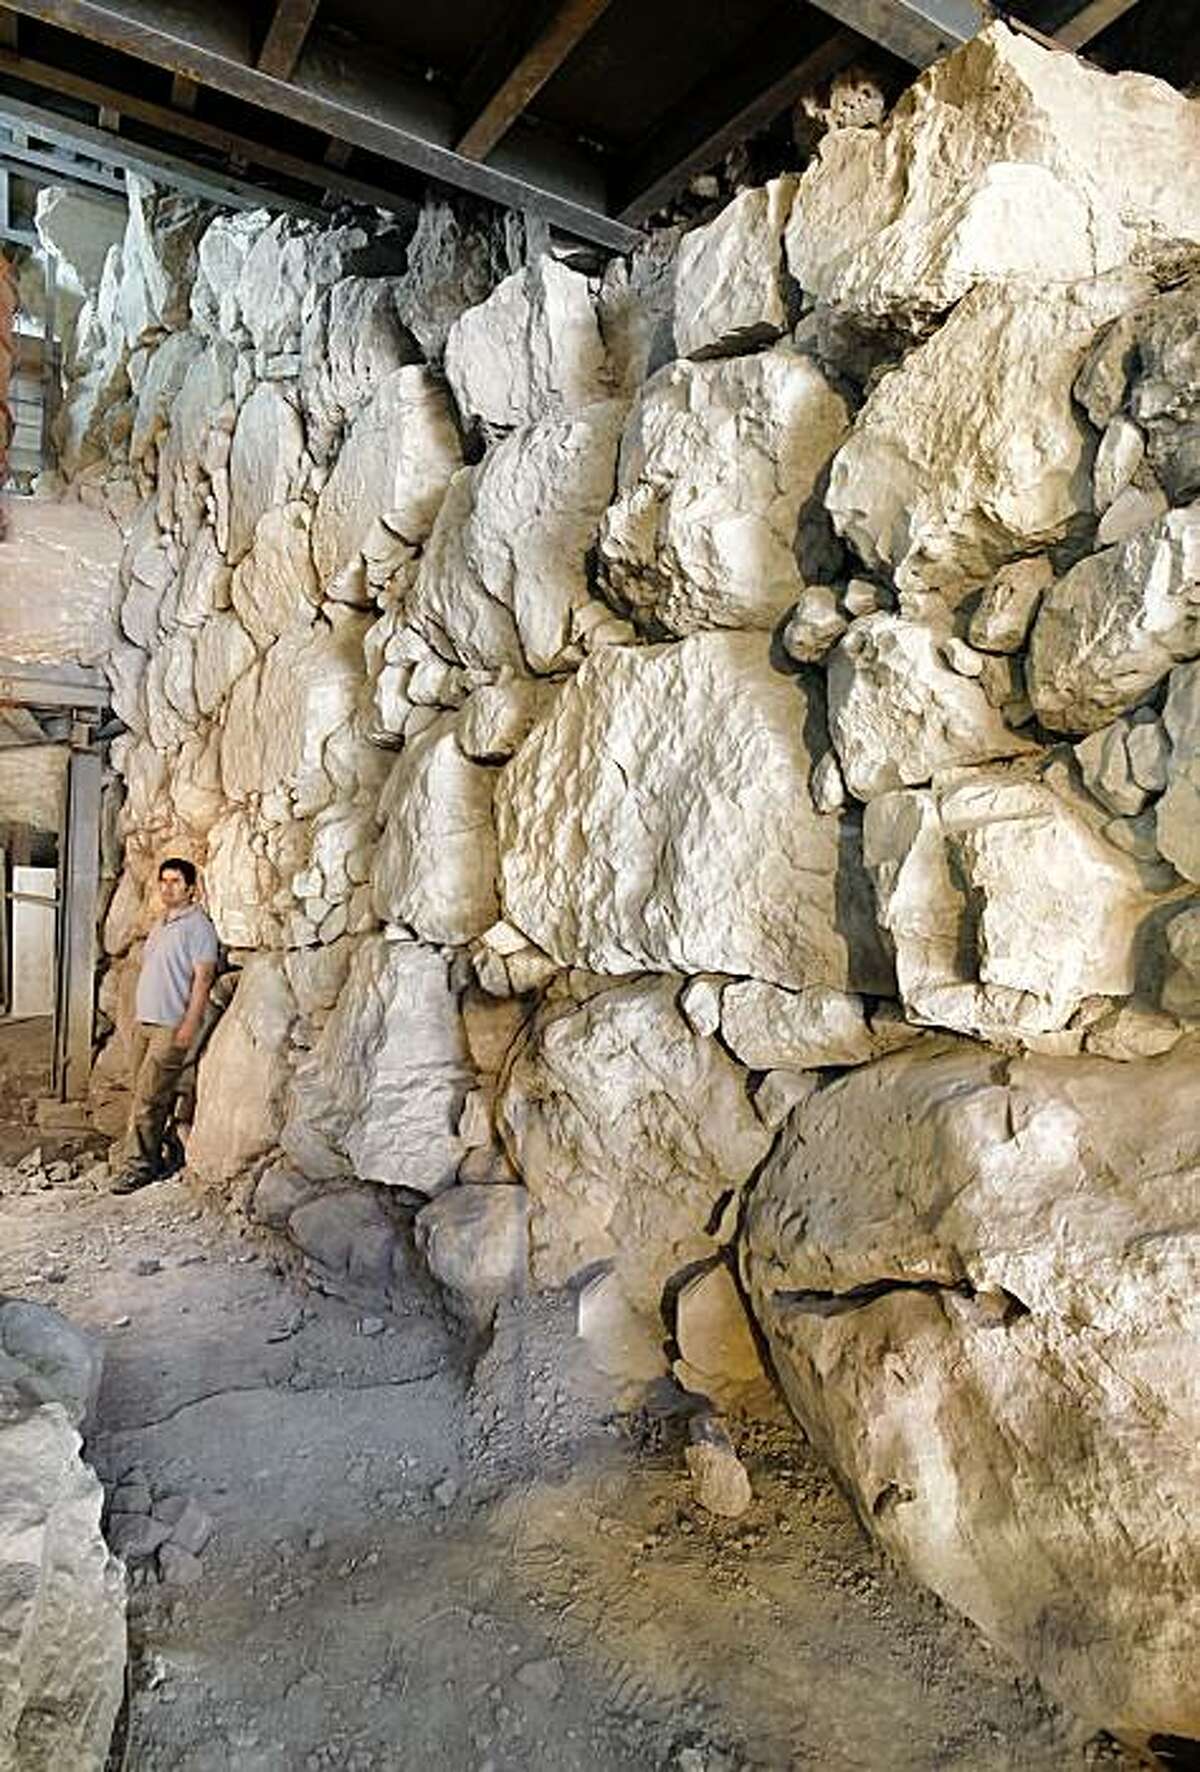 This image made available by Israel's Antiquities Authority Wednesday, Sept. 2, 2009 shows part of a a 3,700-year-old fortification wall discovered in Jerusalem. Archaeologists have discovered a 3,700-year-old wall in the City of David, part of the earliest fortification construction on such a large scale ever found in Jerusalem, the Israel Antiquities Authority said Wednesday. The 26-foot high wall is believed to have been part of a protected passage used by the Biblical Canaanites that led from a fortress on top of a hill to a spring. Ronny Reich, director of the excavation and a professor of archaeology at the University of Haifa, said the discovery marks the first time such "massive construction" before the time of King Herod was found in the oldest parts of the city. (AP Photo/IAA) ** NO SALES **